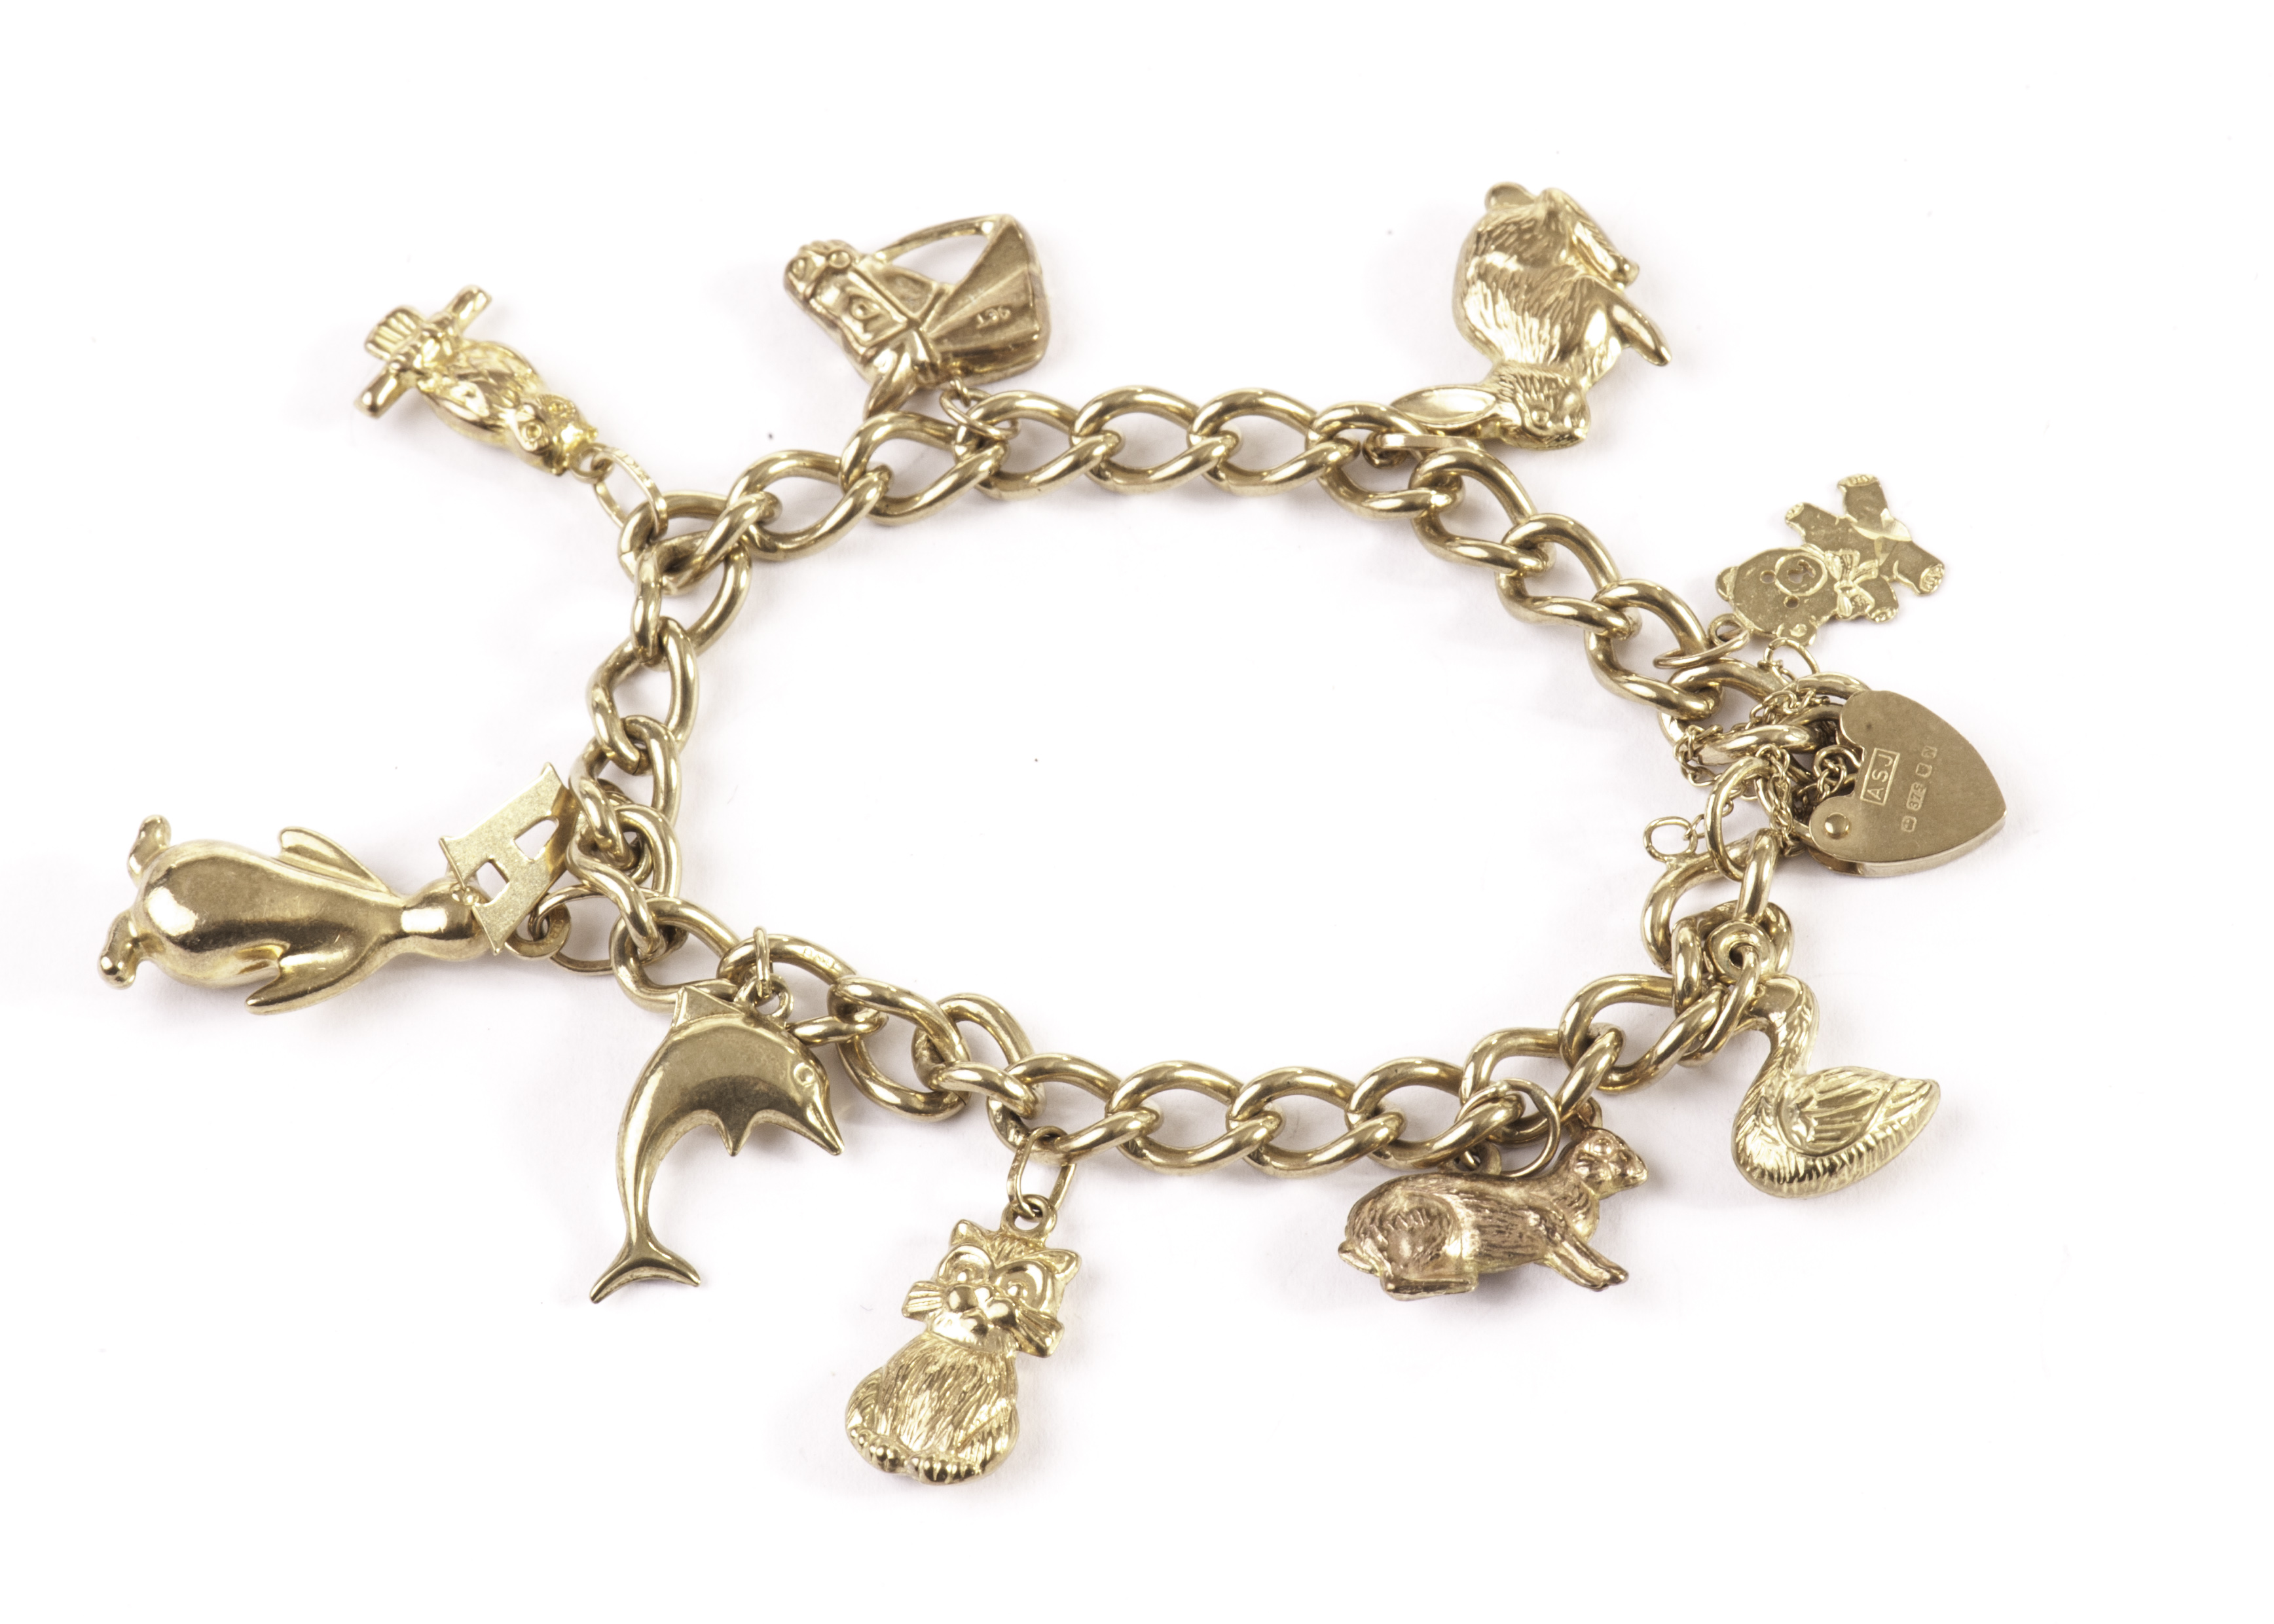 A 9ct gold charm bracelet, the curb link chain united by a heart shaped clasp and supporting